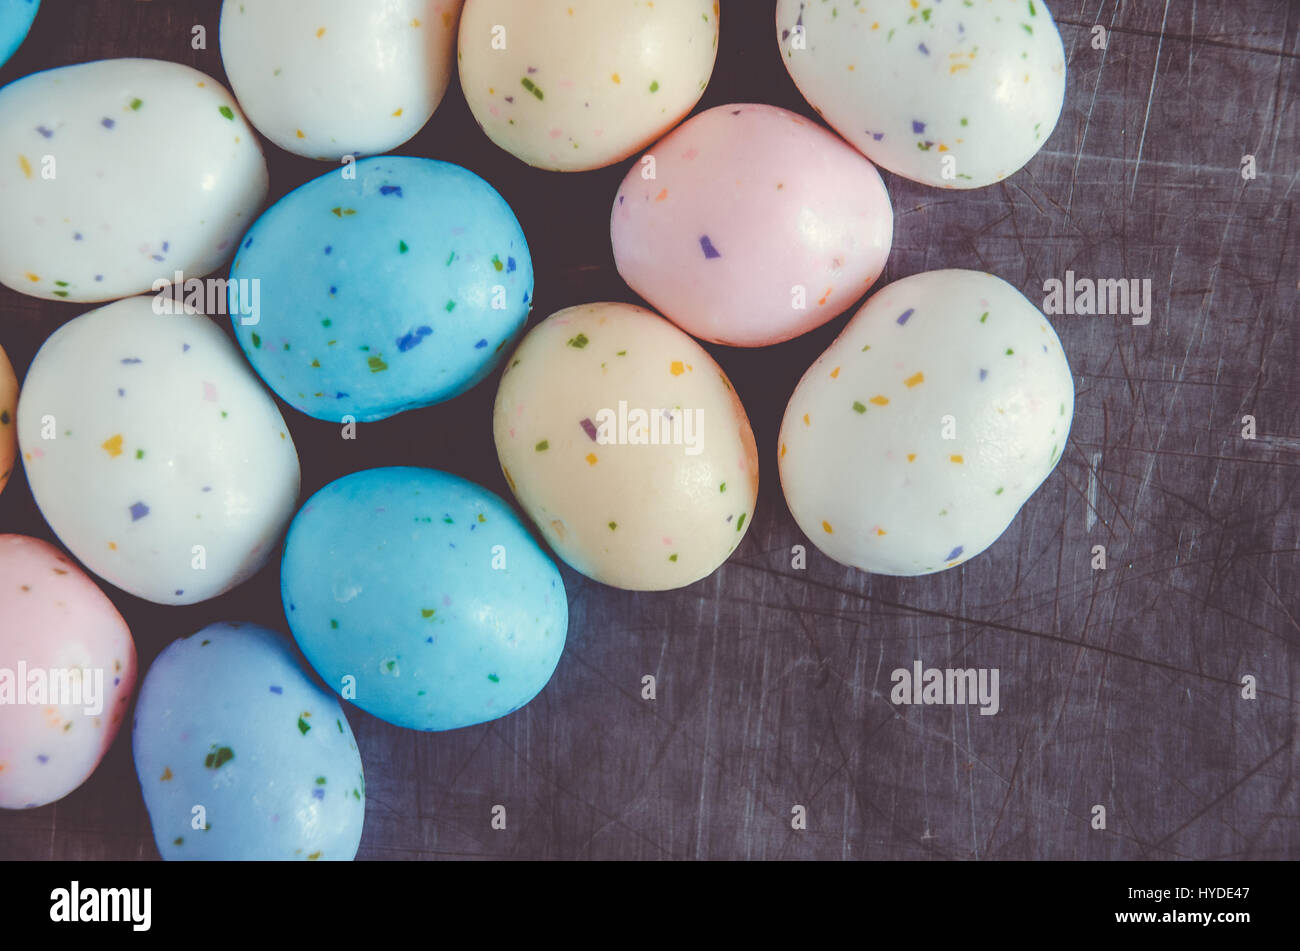 Colorful Candies Stock Photo